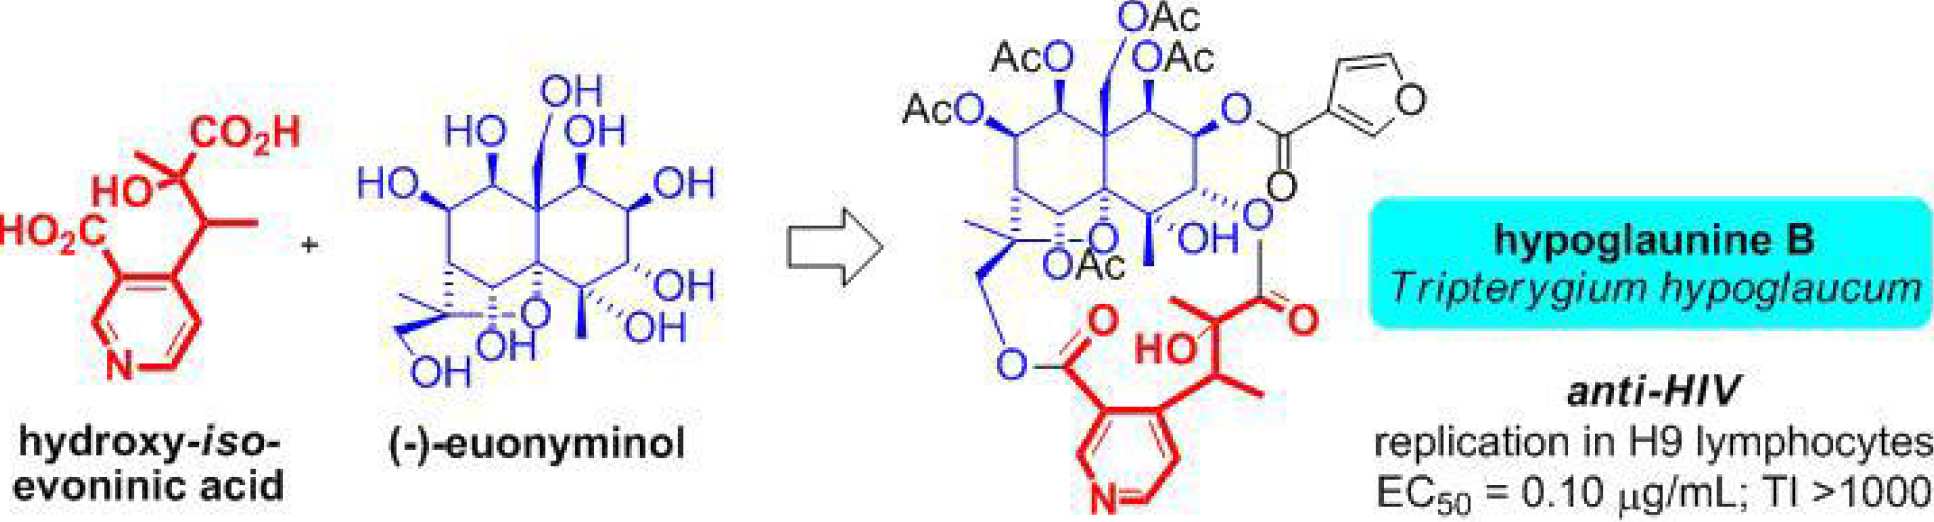 The Spivey Group approach to the synthesis of euonyminol and hydroxy iso-evoninic acid